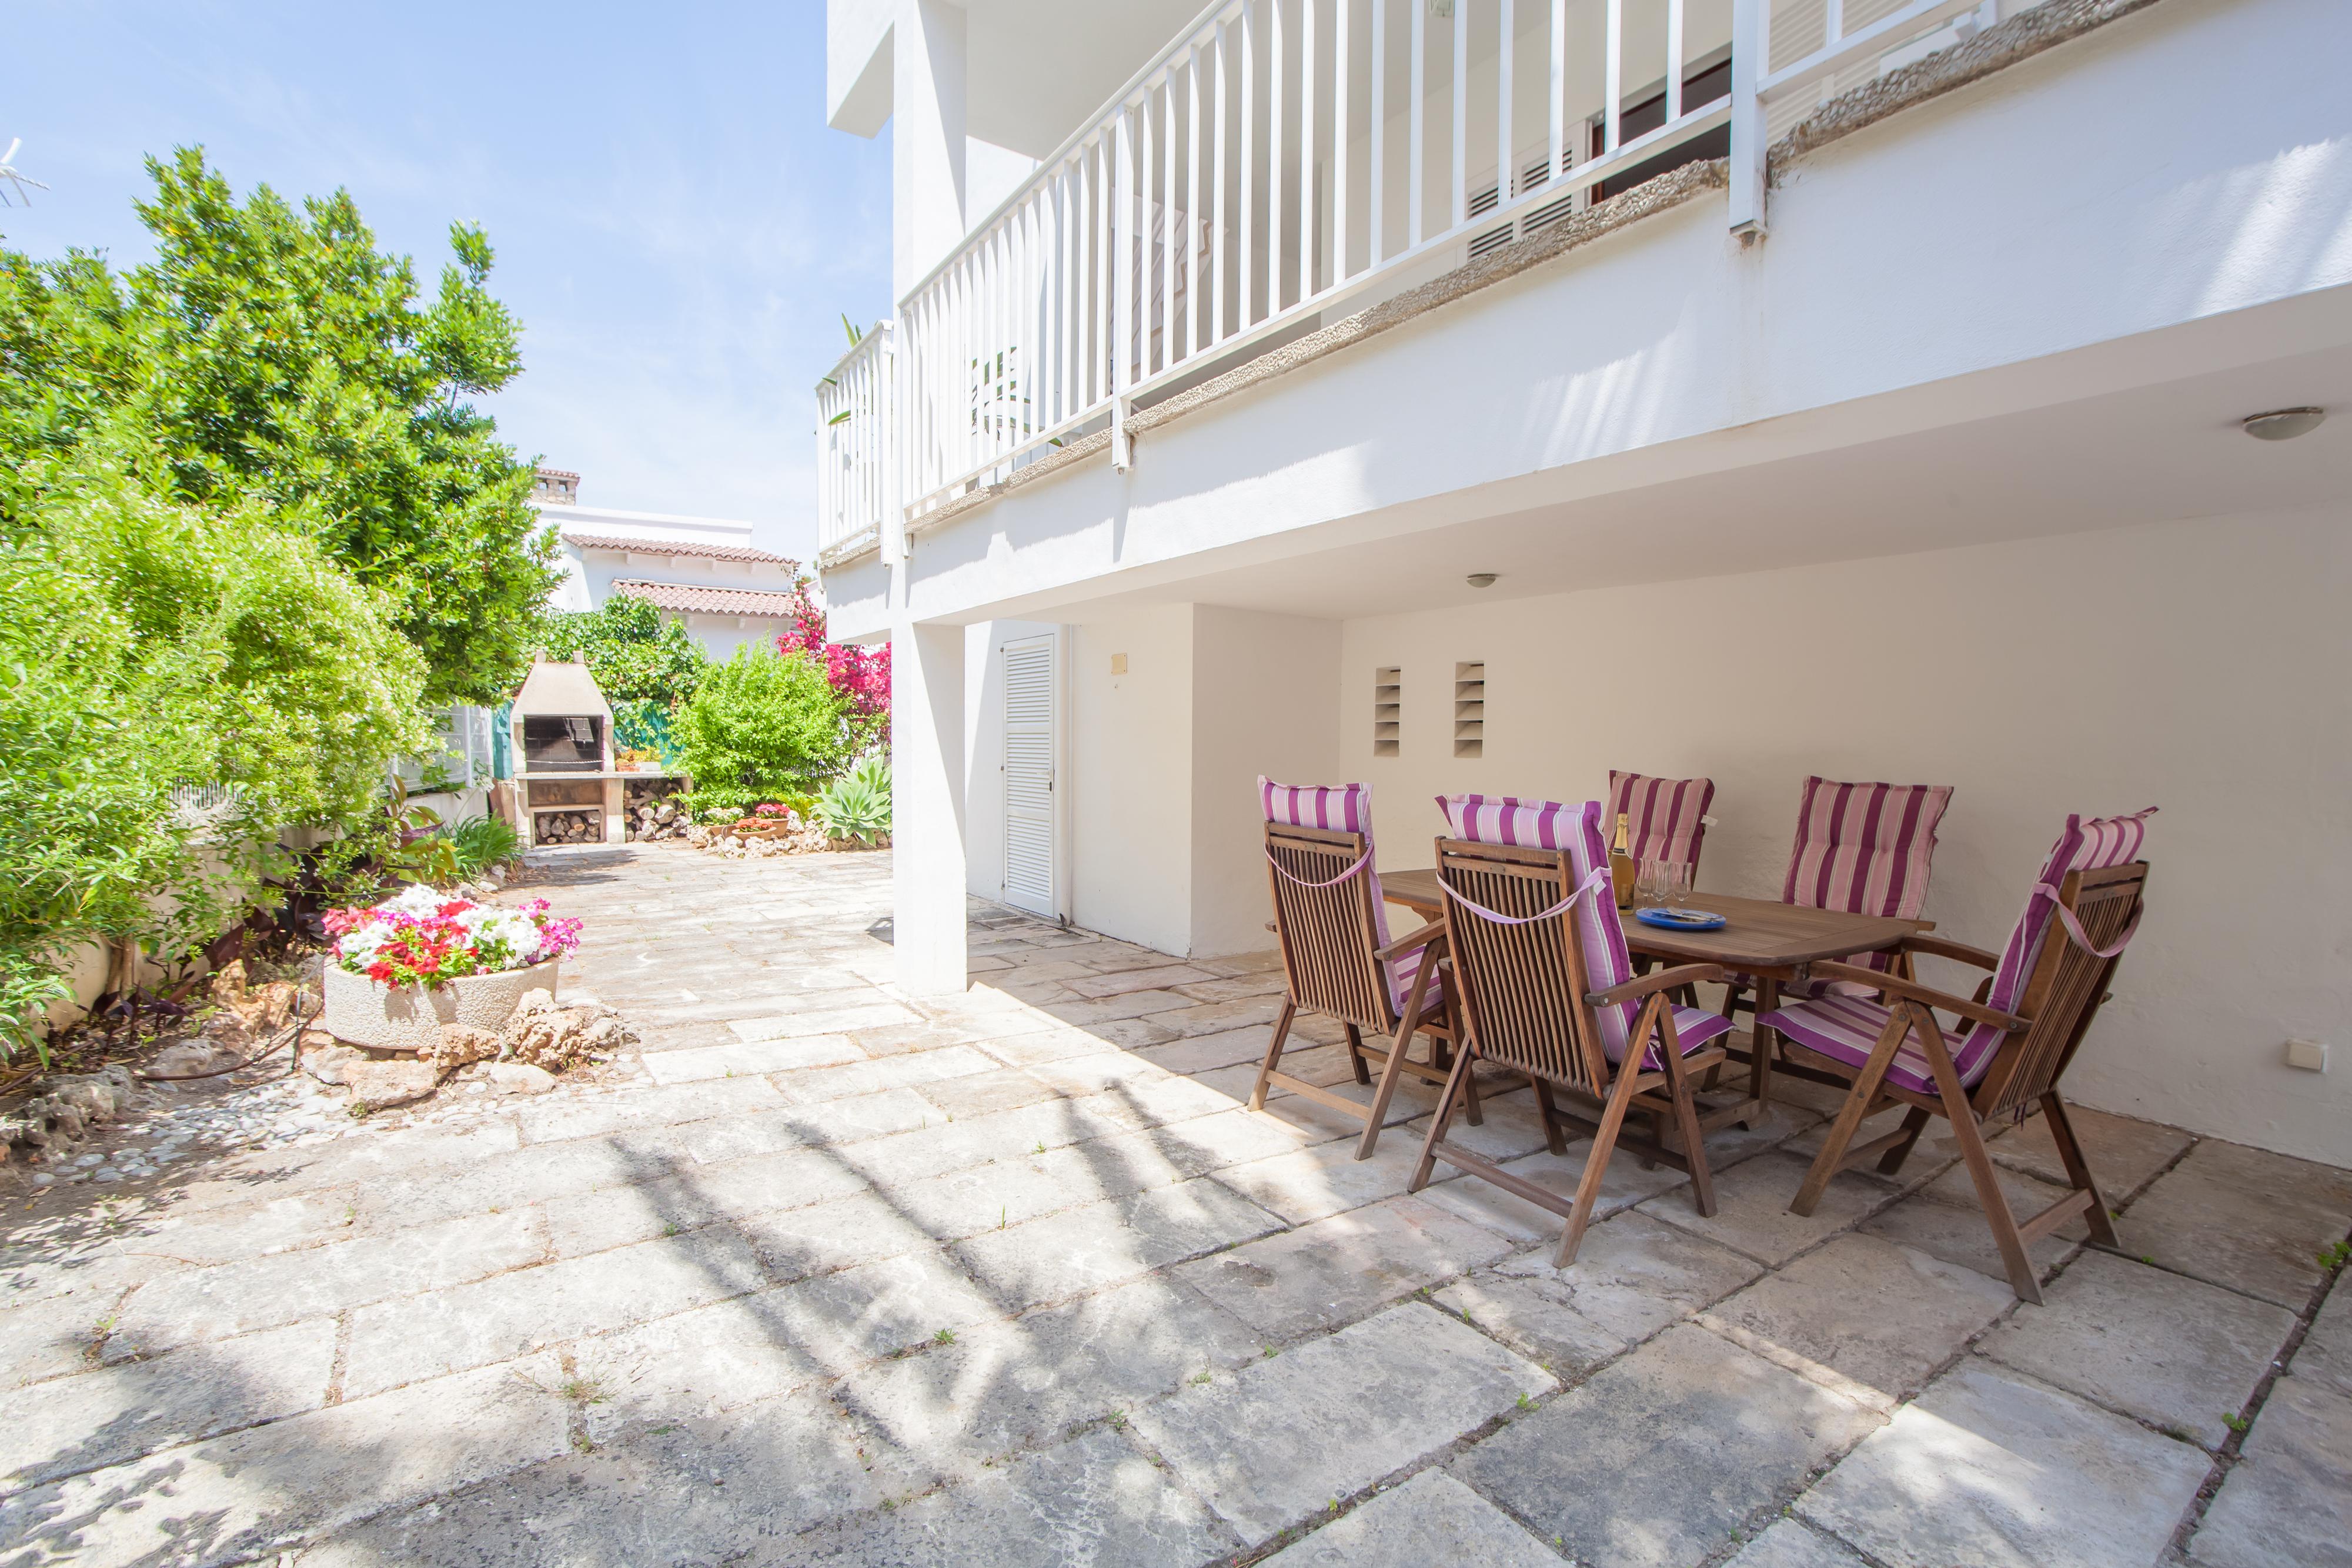 Property Image 1 - CAN MIQUELET - Apartment with sea views in PORT D’ALCUDIA. Free WiFi